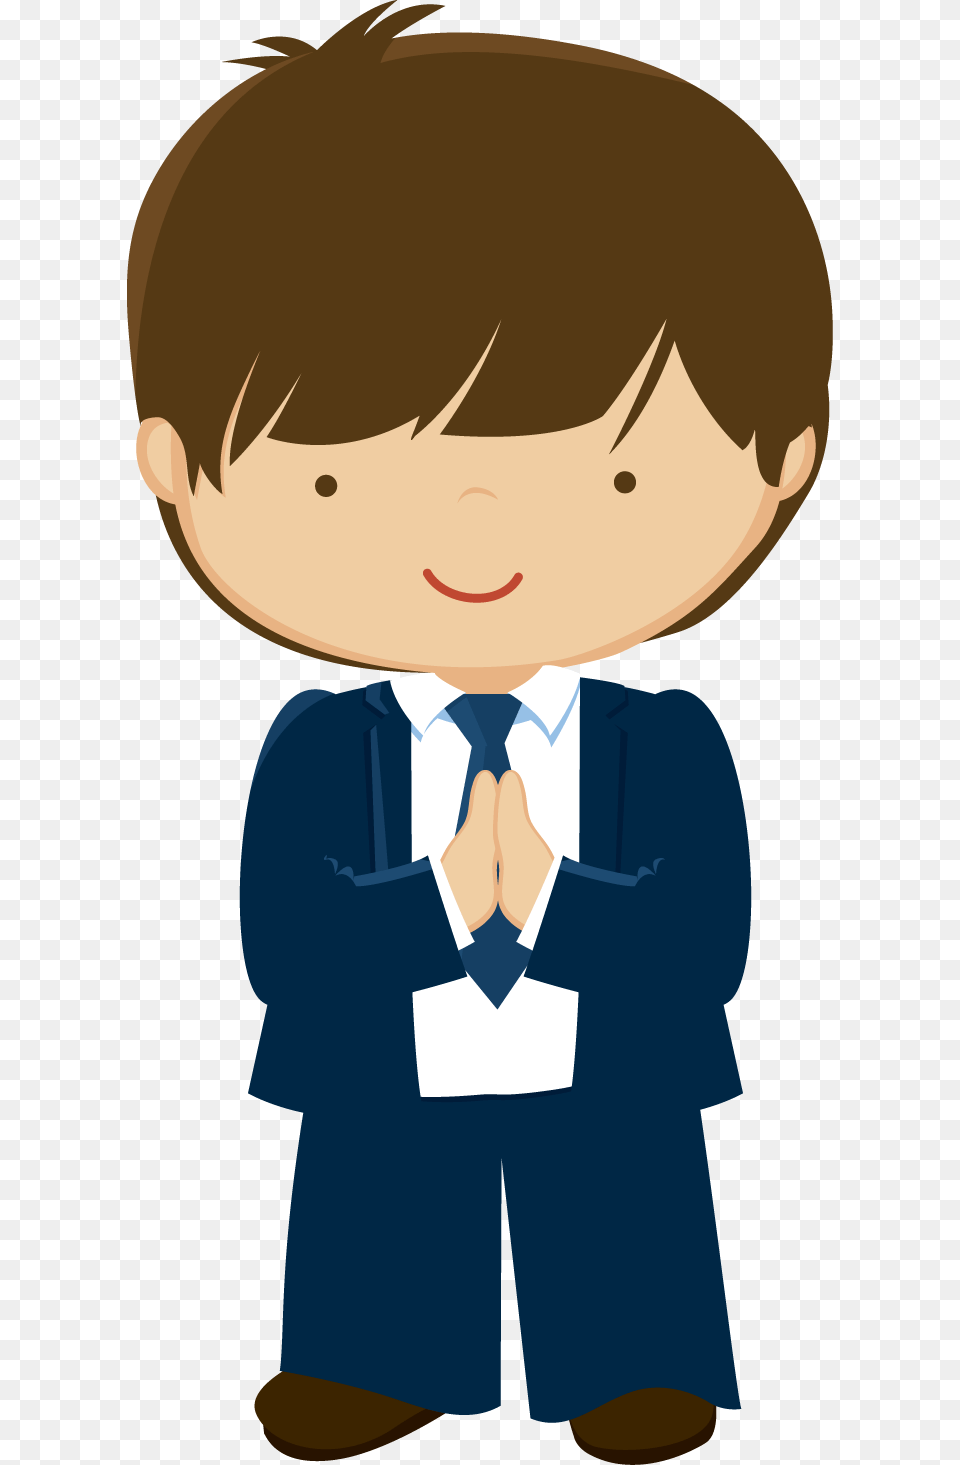 Religious Babyoy Clipart Communion First, Accessories, Formal Wear, Tie, Publication Png